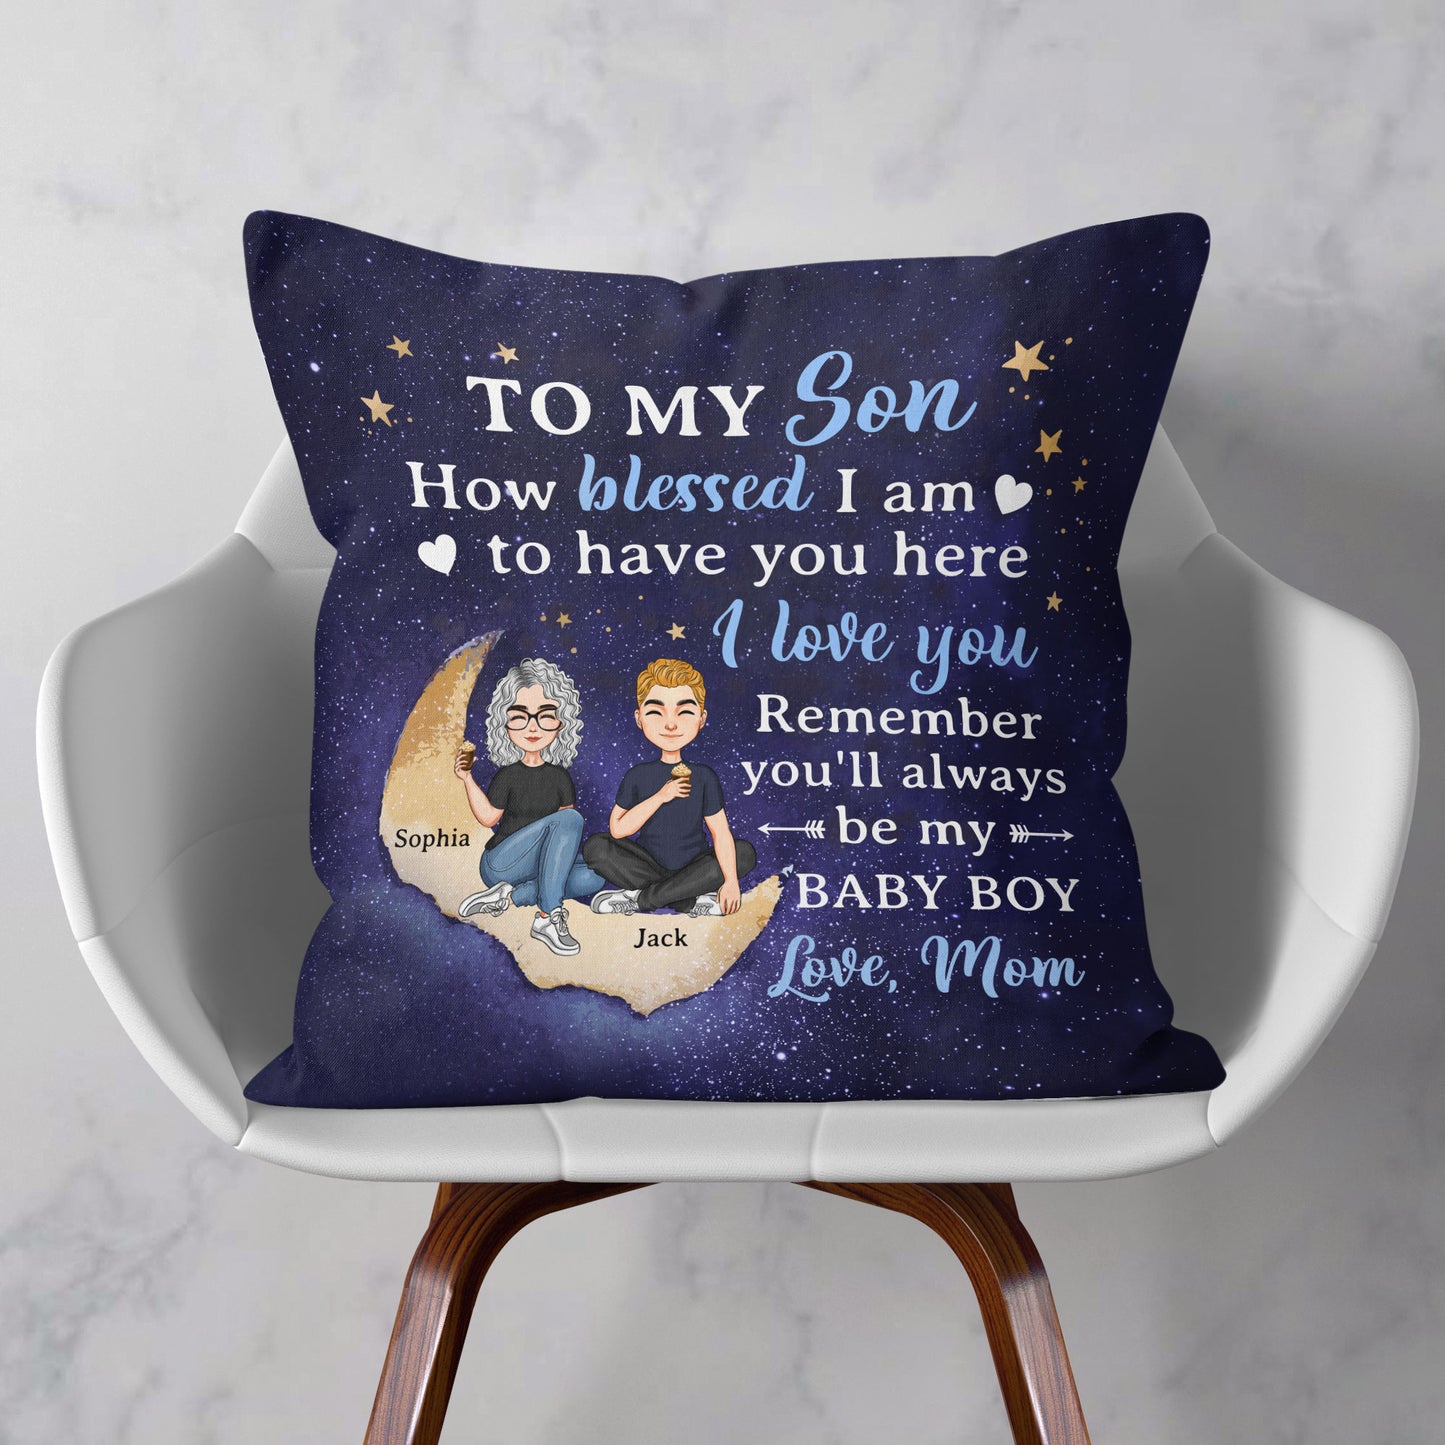 To My Daughter To My Son I Love You - Personalized Pillow - Birthday, Loving Gift For Daughter, Son, Kids